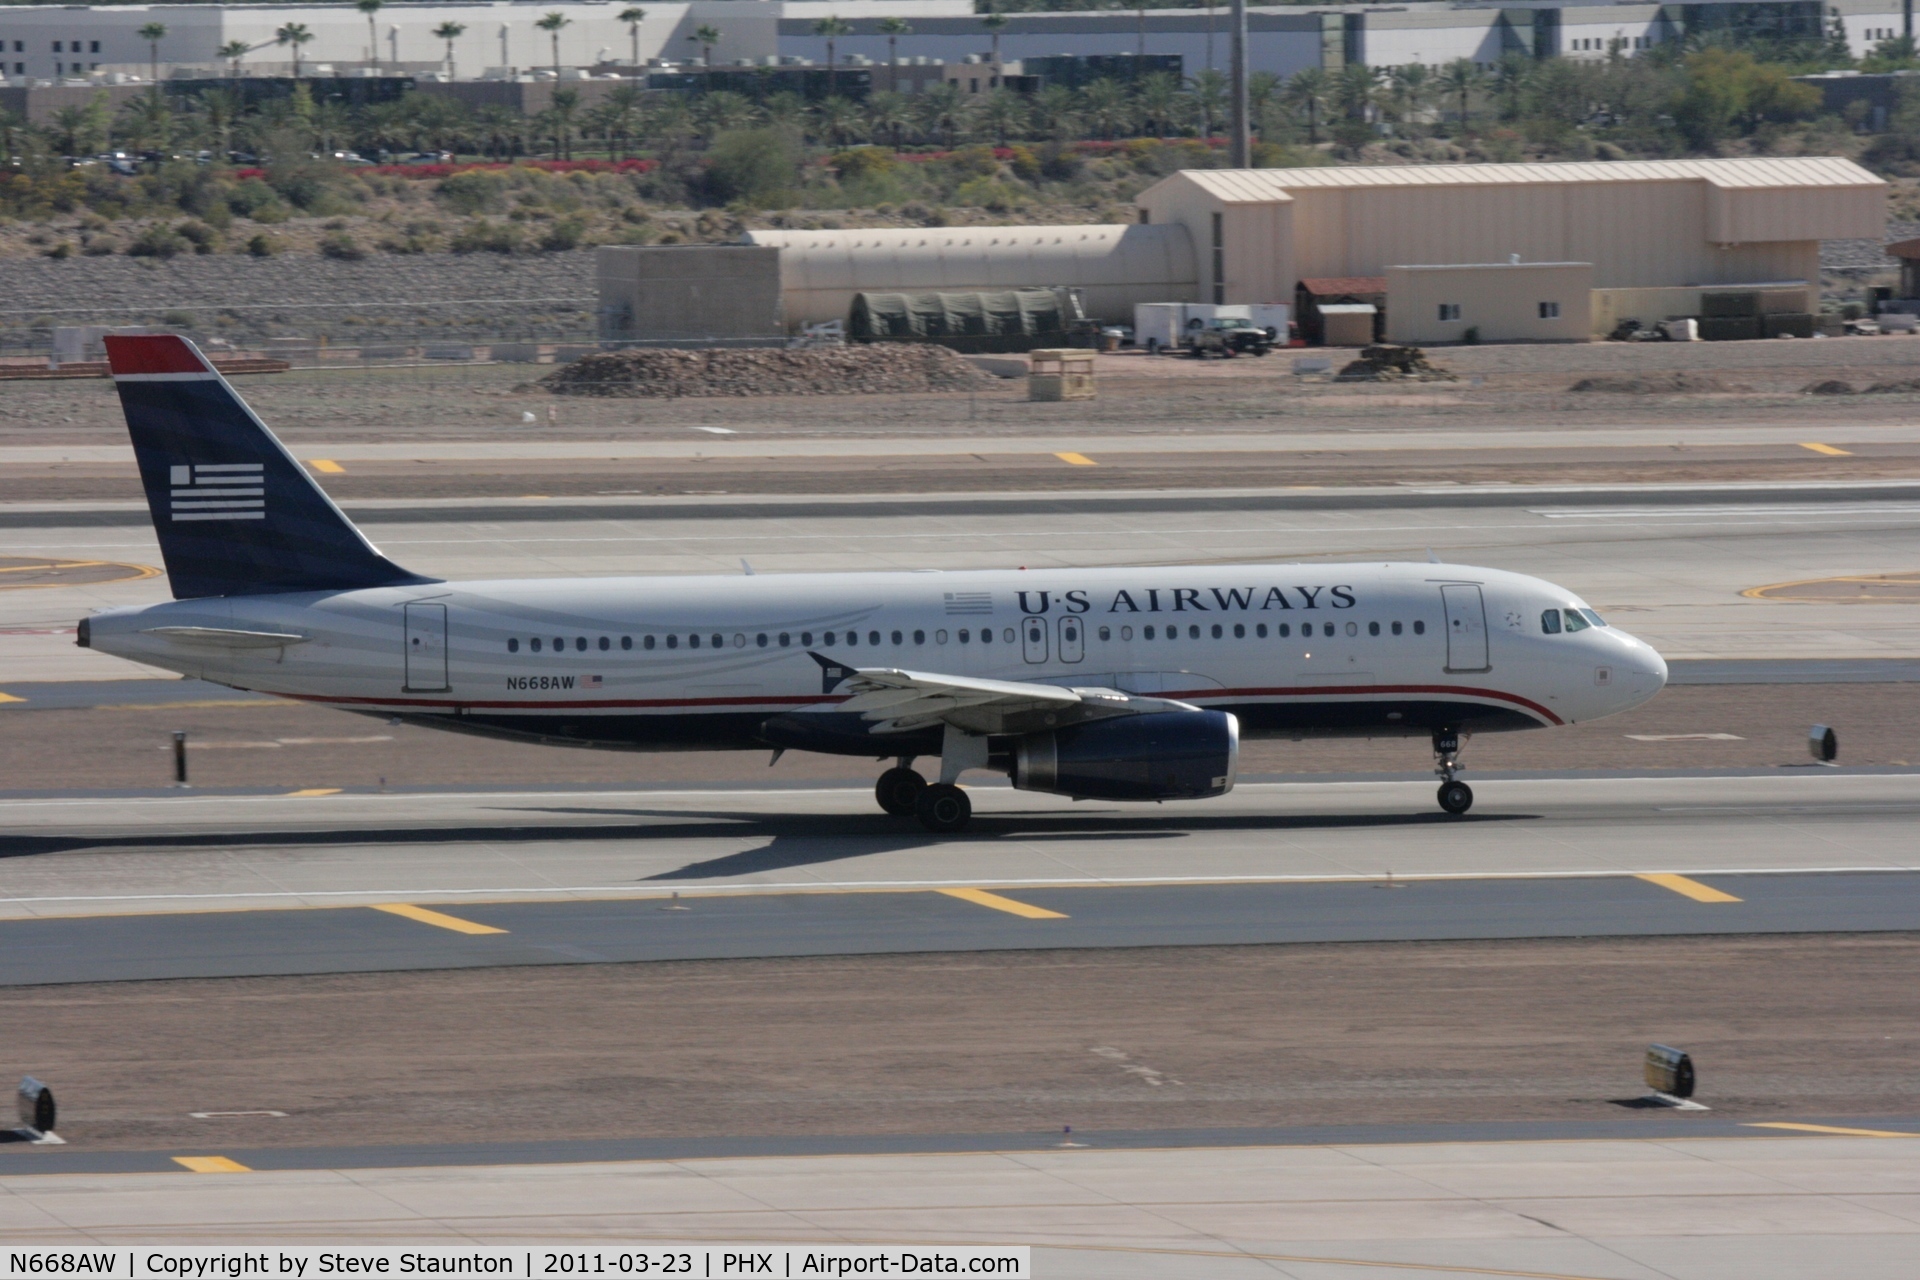 N668AW, 2002 Airbus A320-232 C/N 1764, Taken at Phoenix Sky Harbor Airport, in March 2011 whilst on an Aeroprint Aviation tour